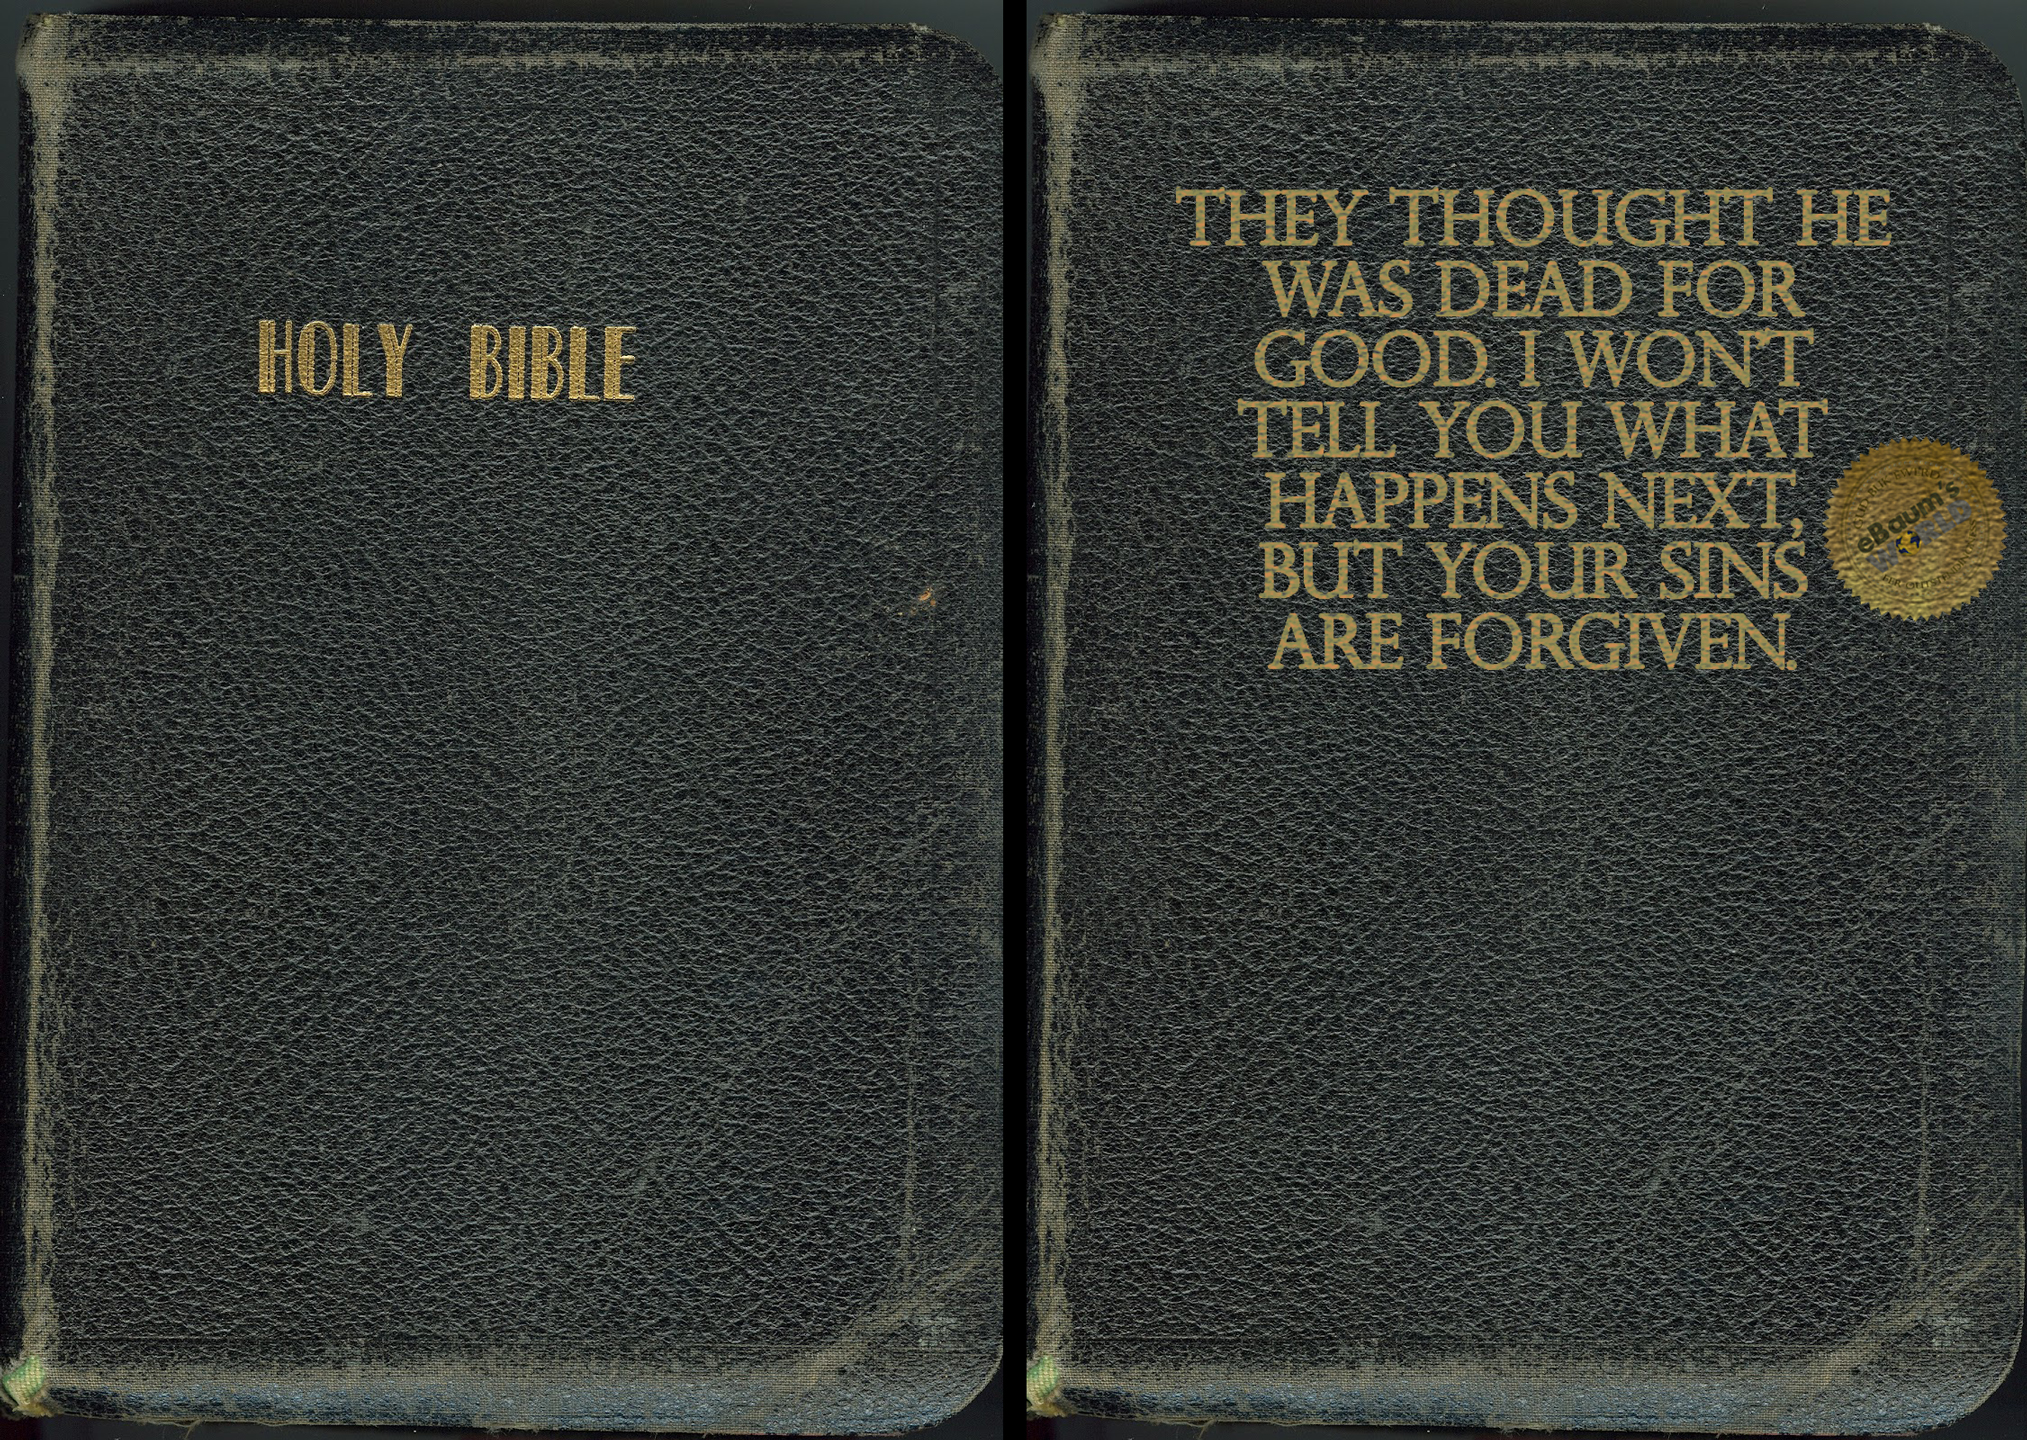 old bible cover - Holy Bible They Thought He Was Dead For Good. I Wont Tell You What Happens Next. But Your Sins Are Forgiven